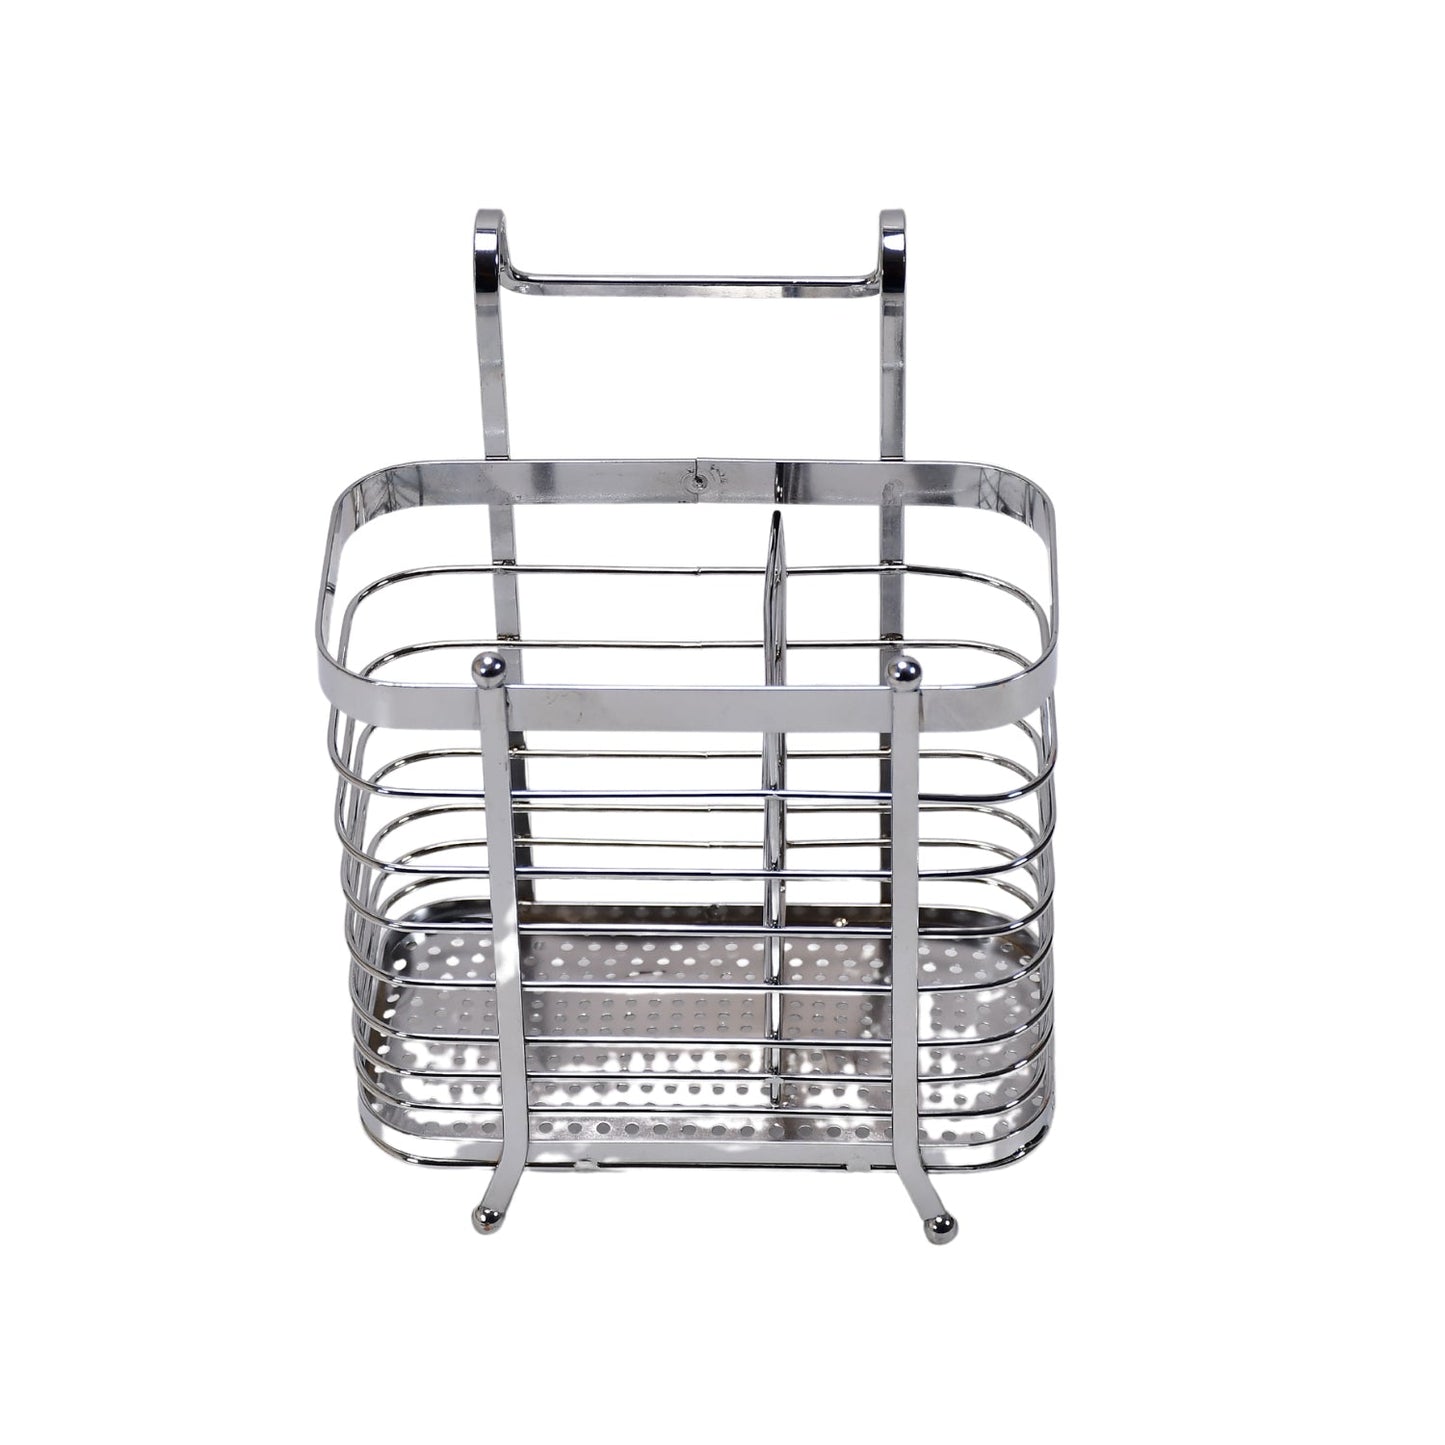 5118 Stainless Steel and Plastic Hanging and Stand Utensil Drying Rack DukanDaily